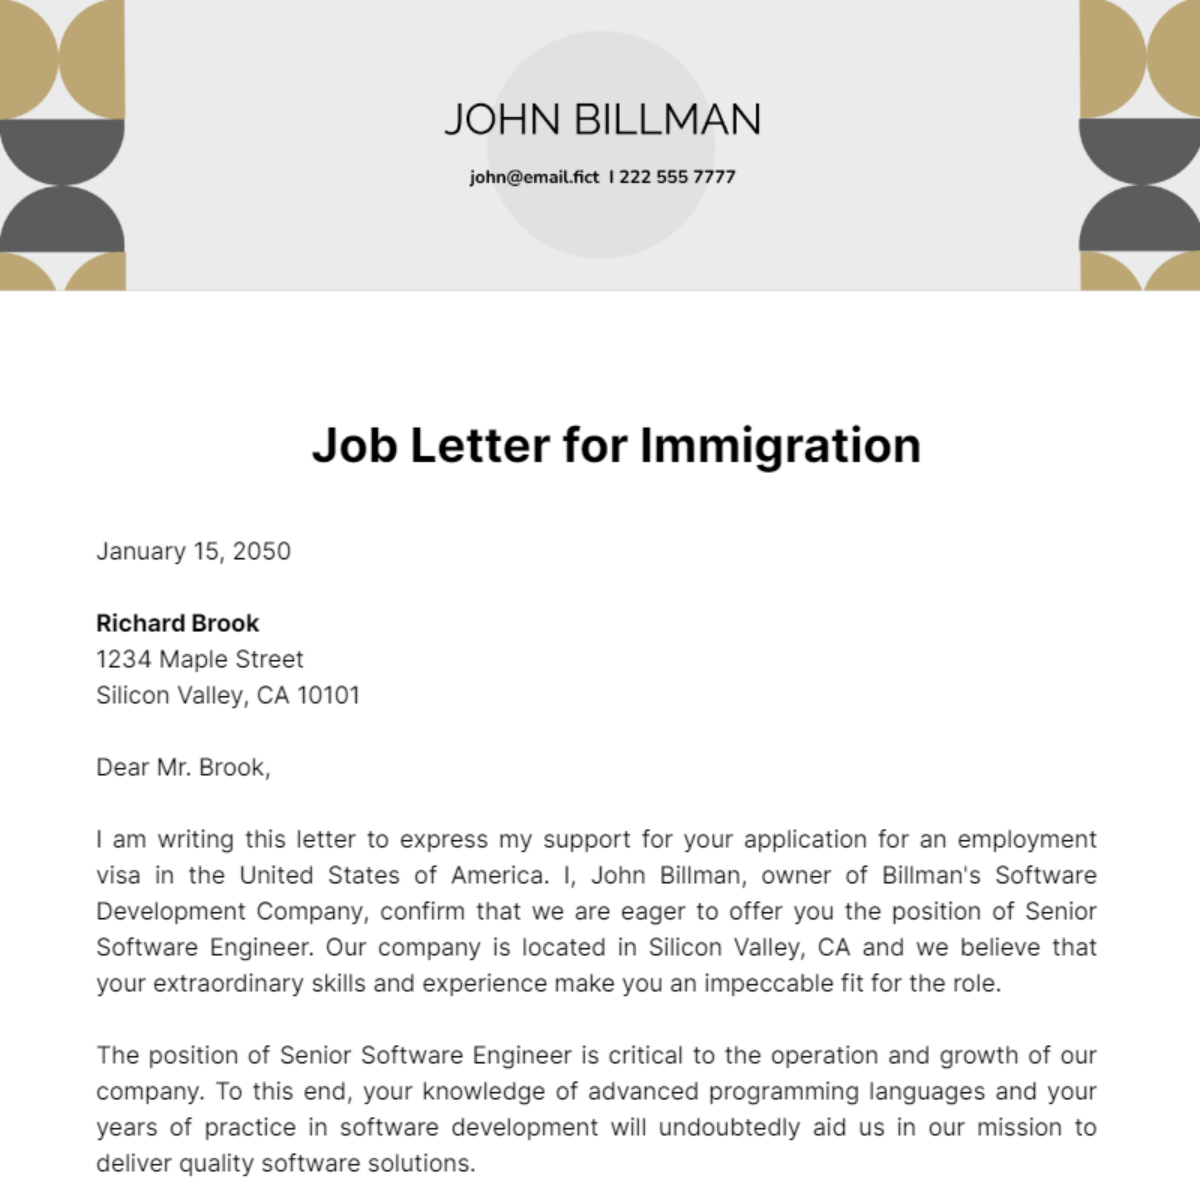 Job Letter for Immigration Template